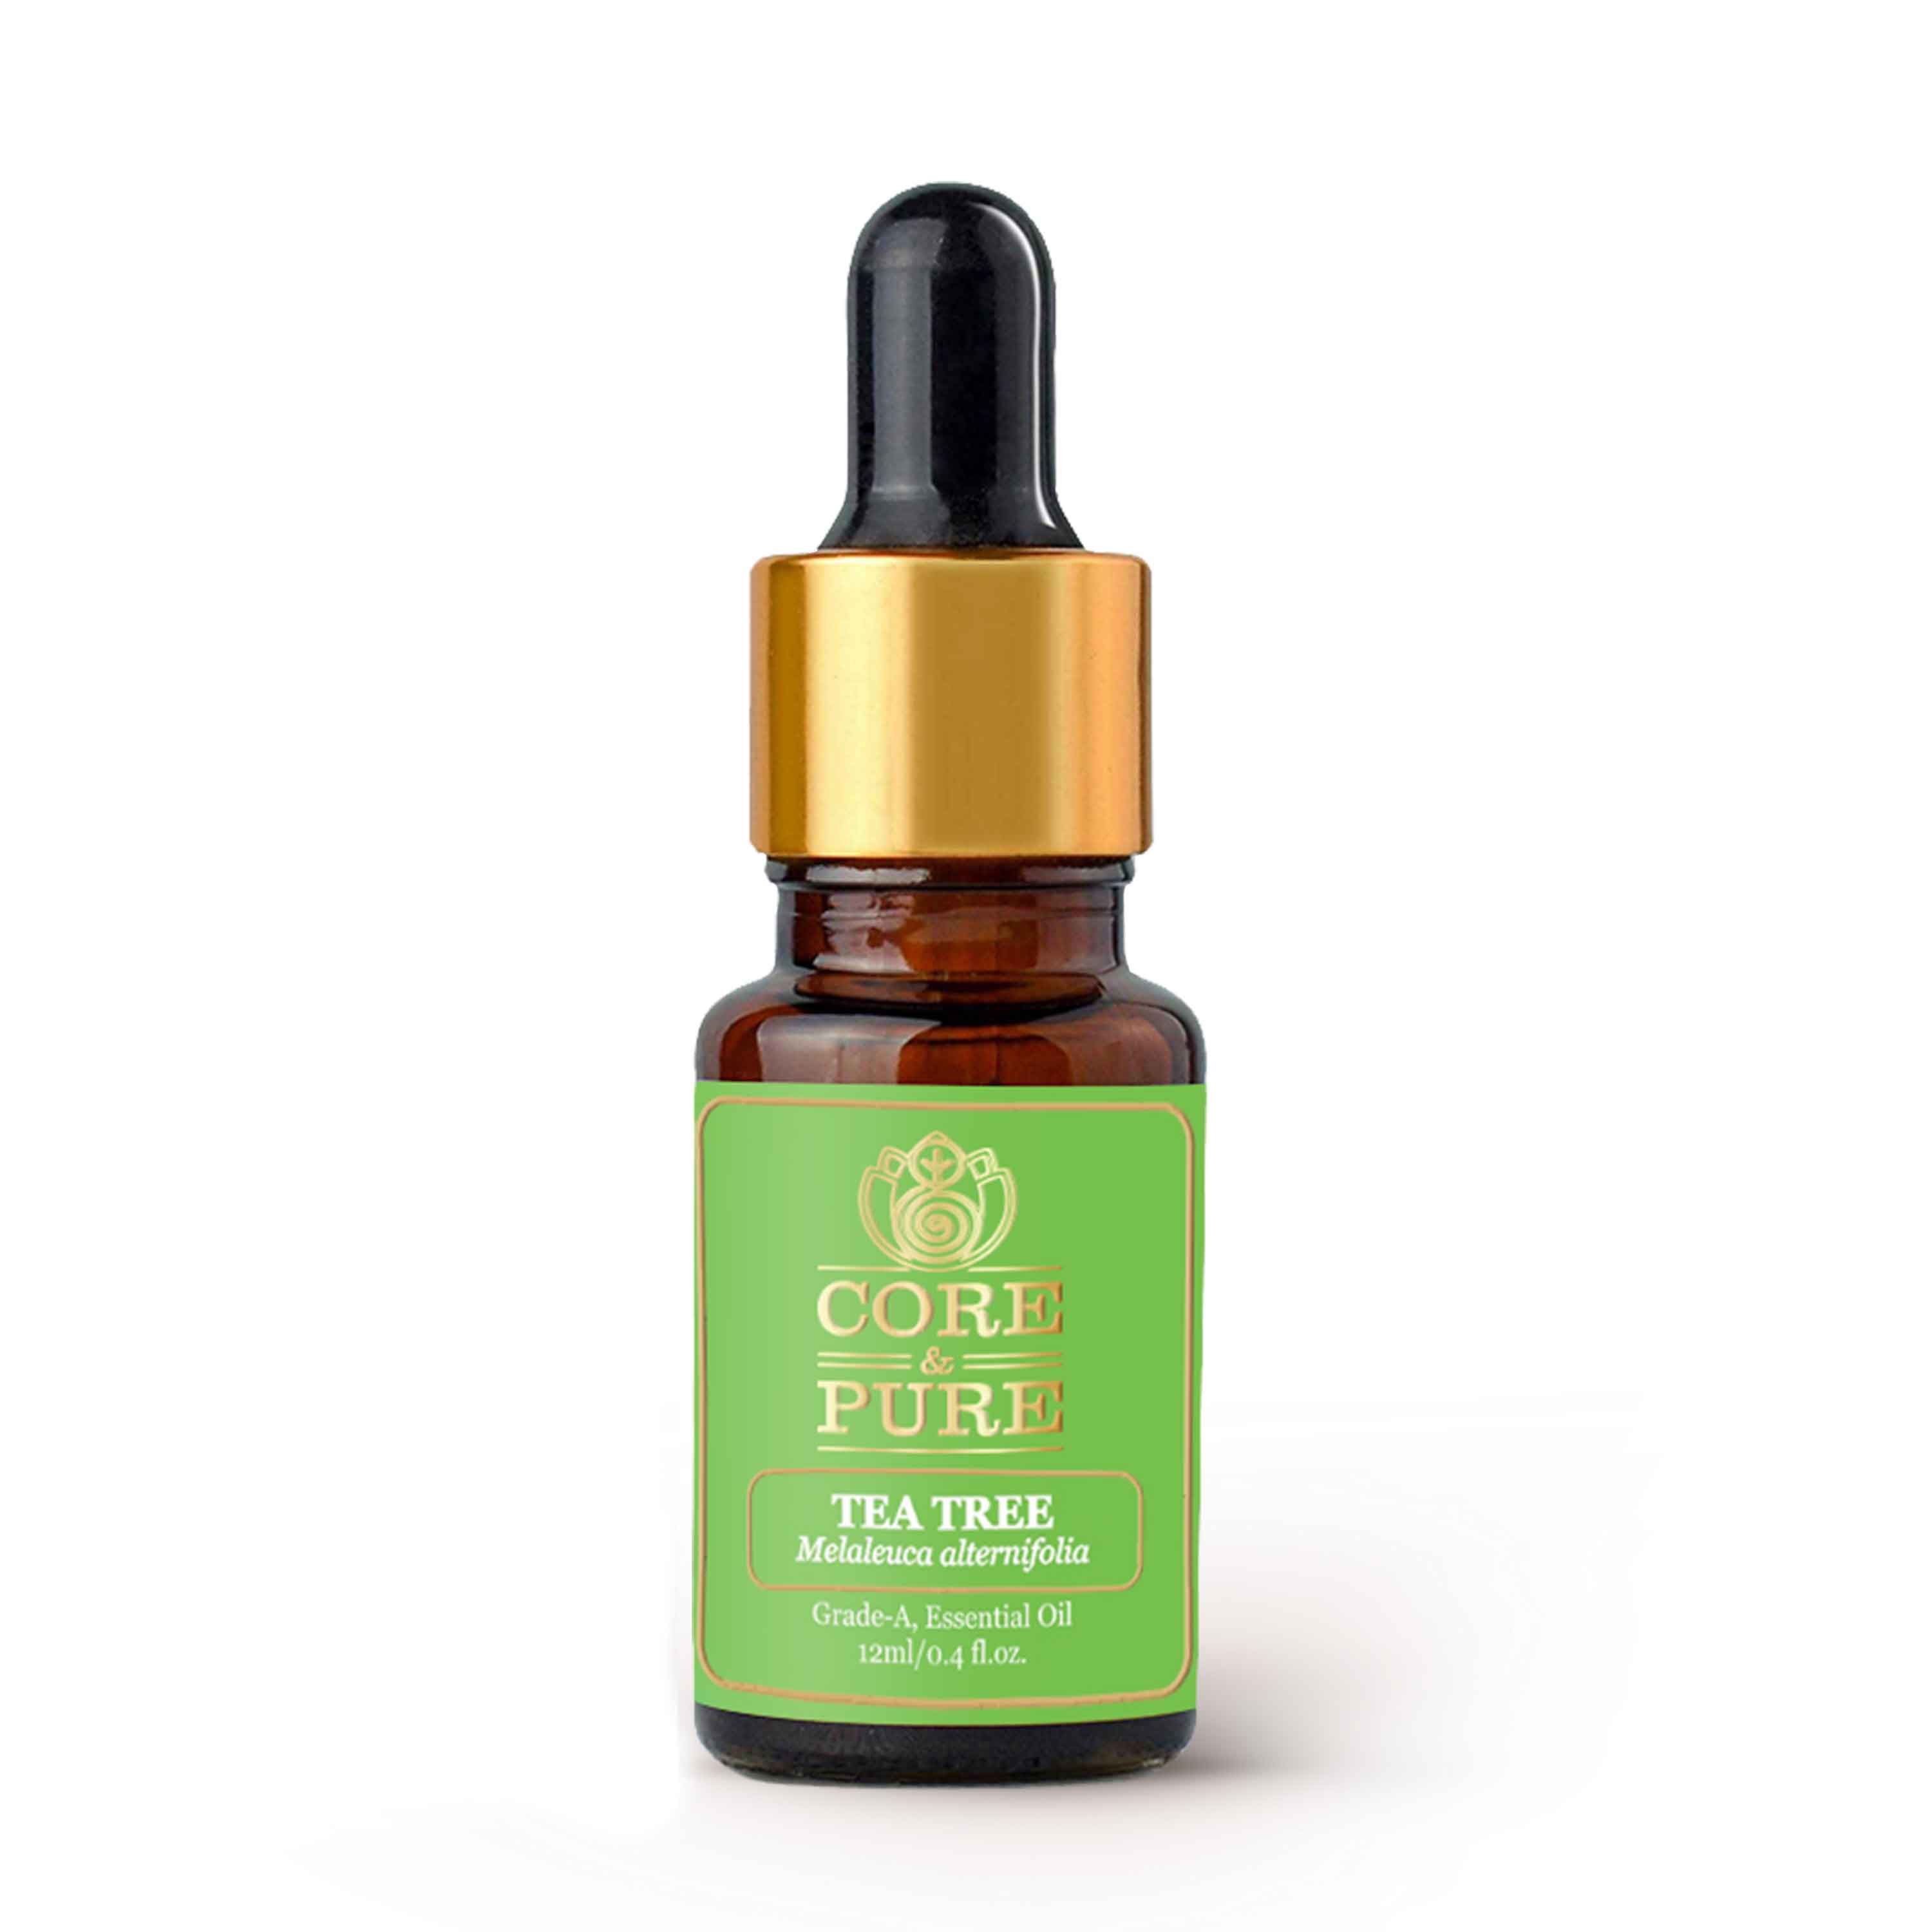 Tea Tree Essential Oil From CORE & PURE